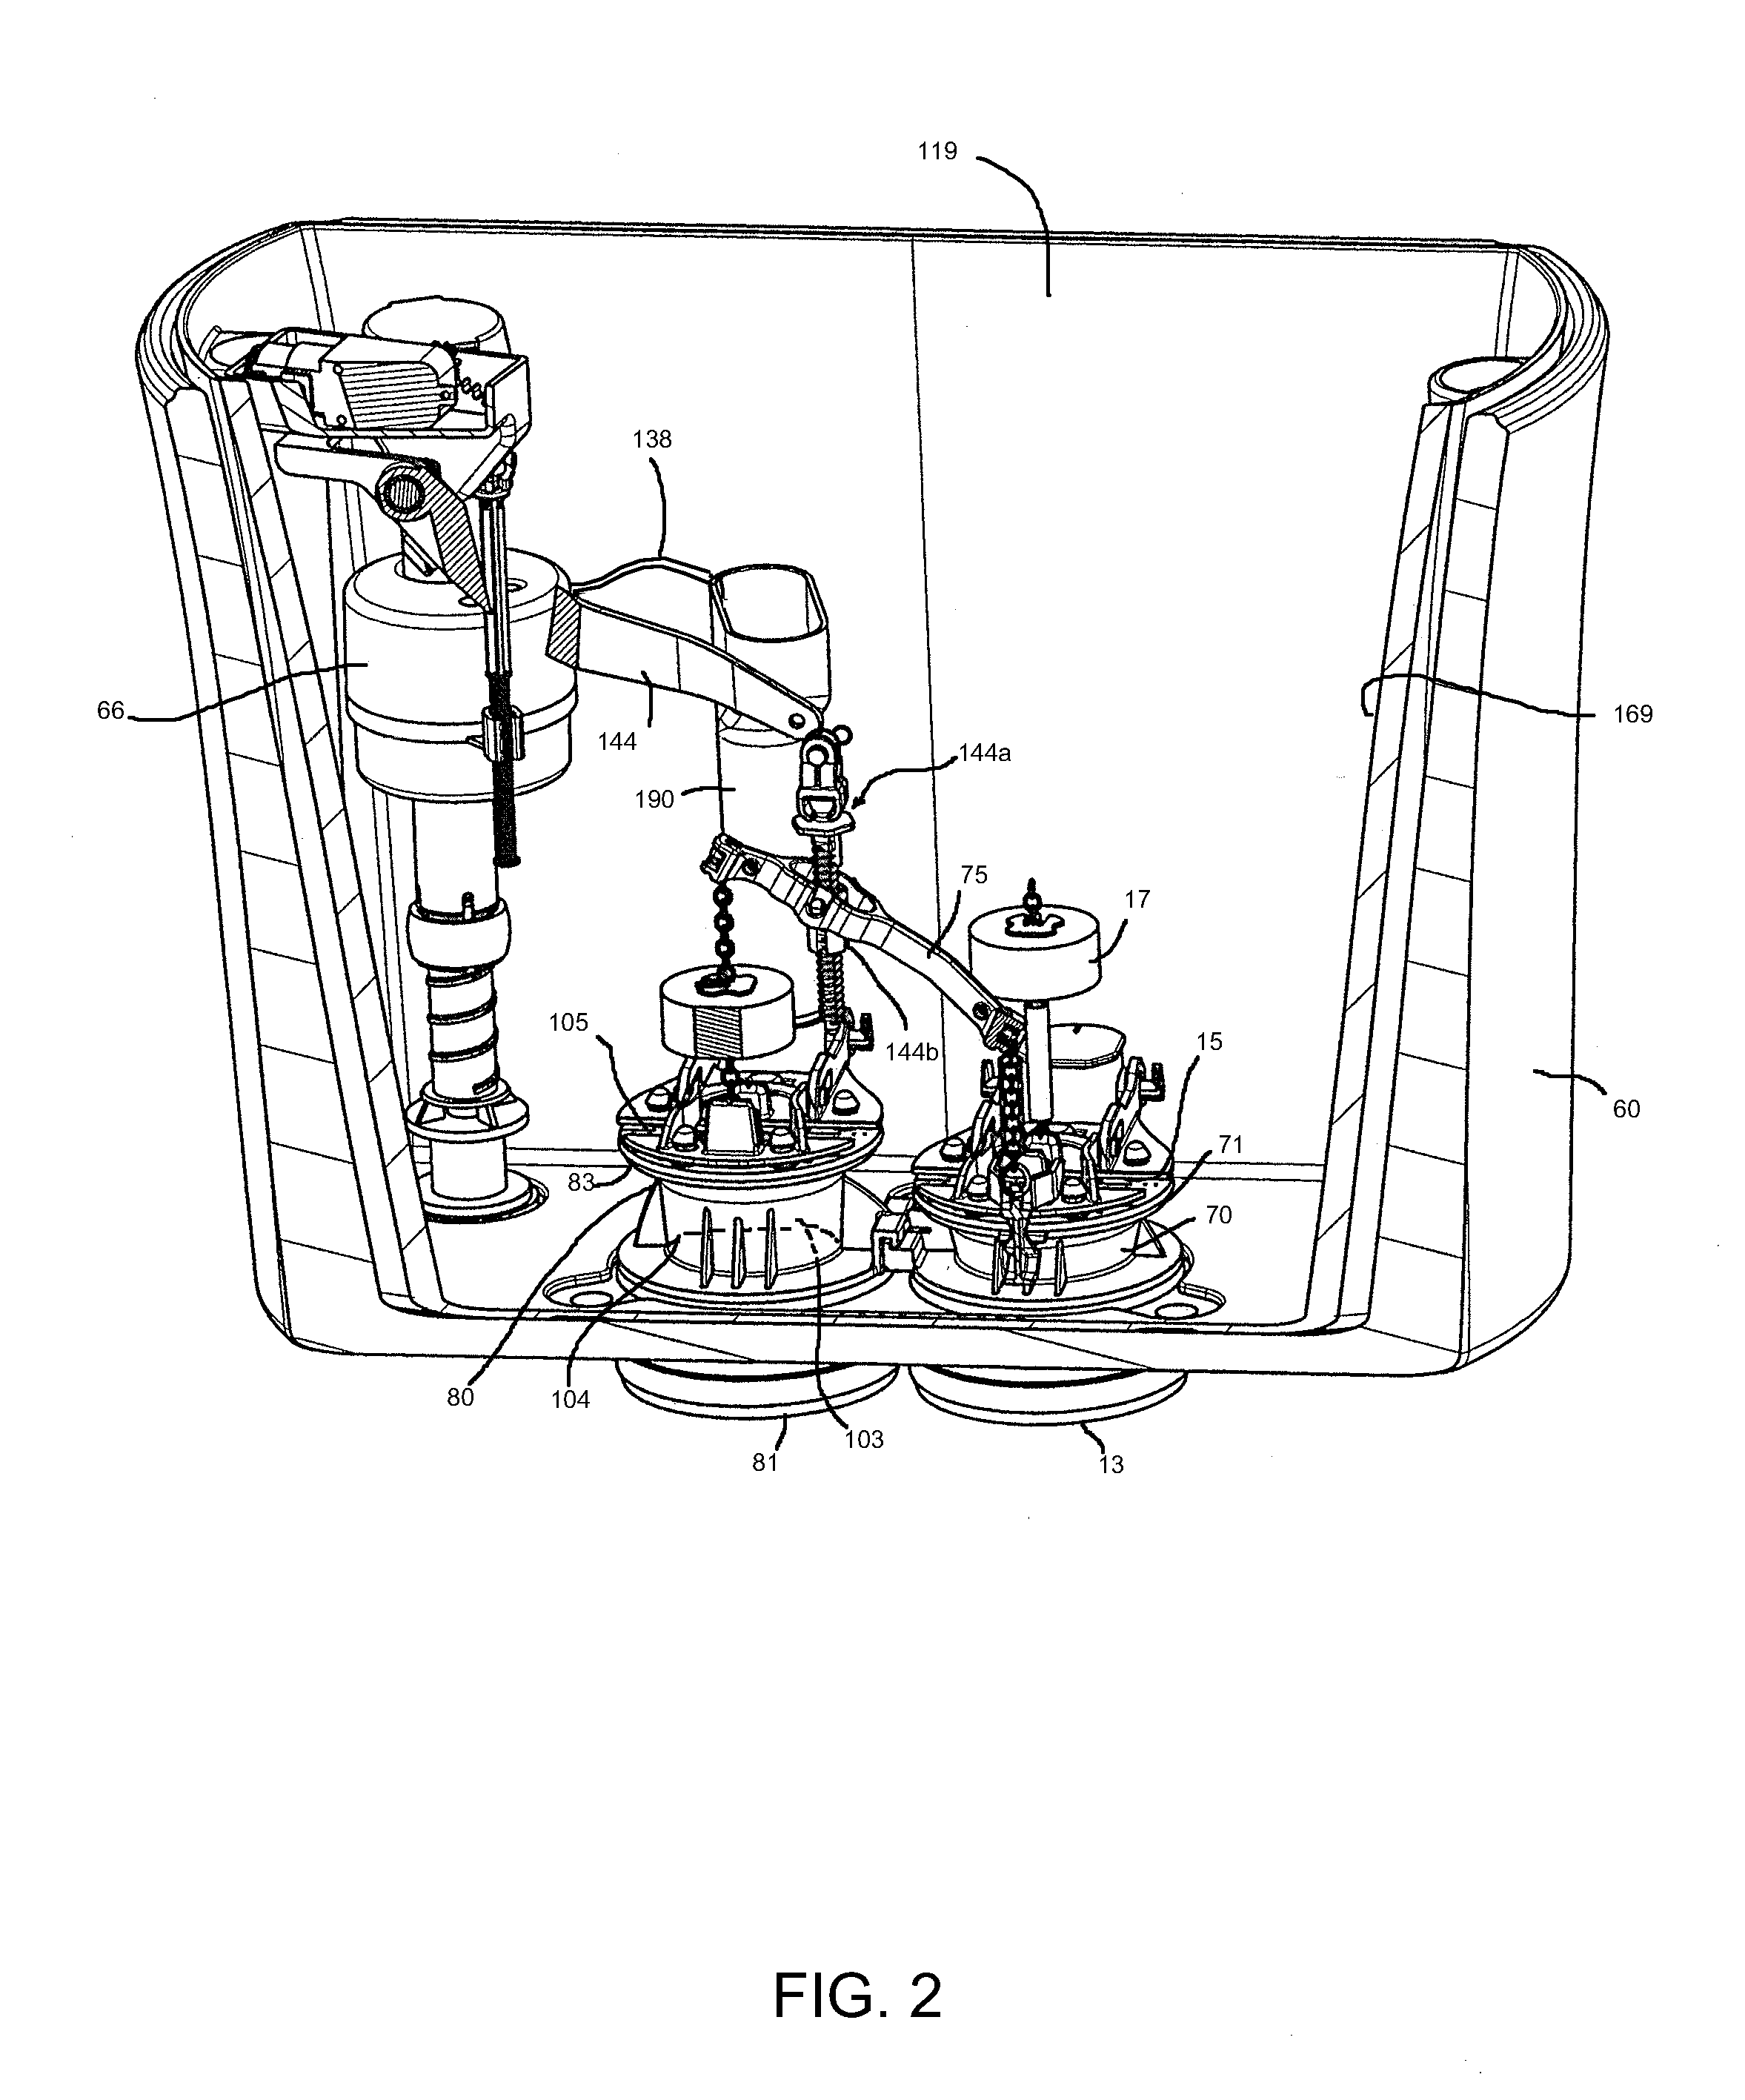 Self-Cleaning Toilet Assembly and System